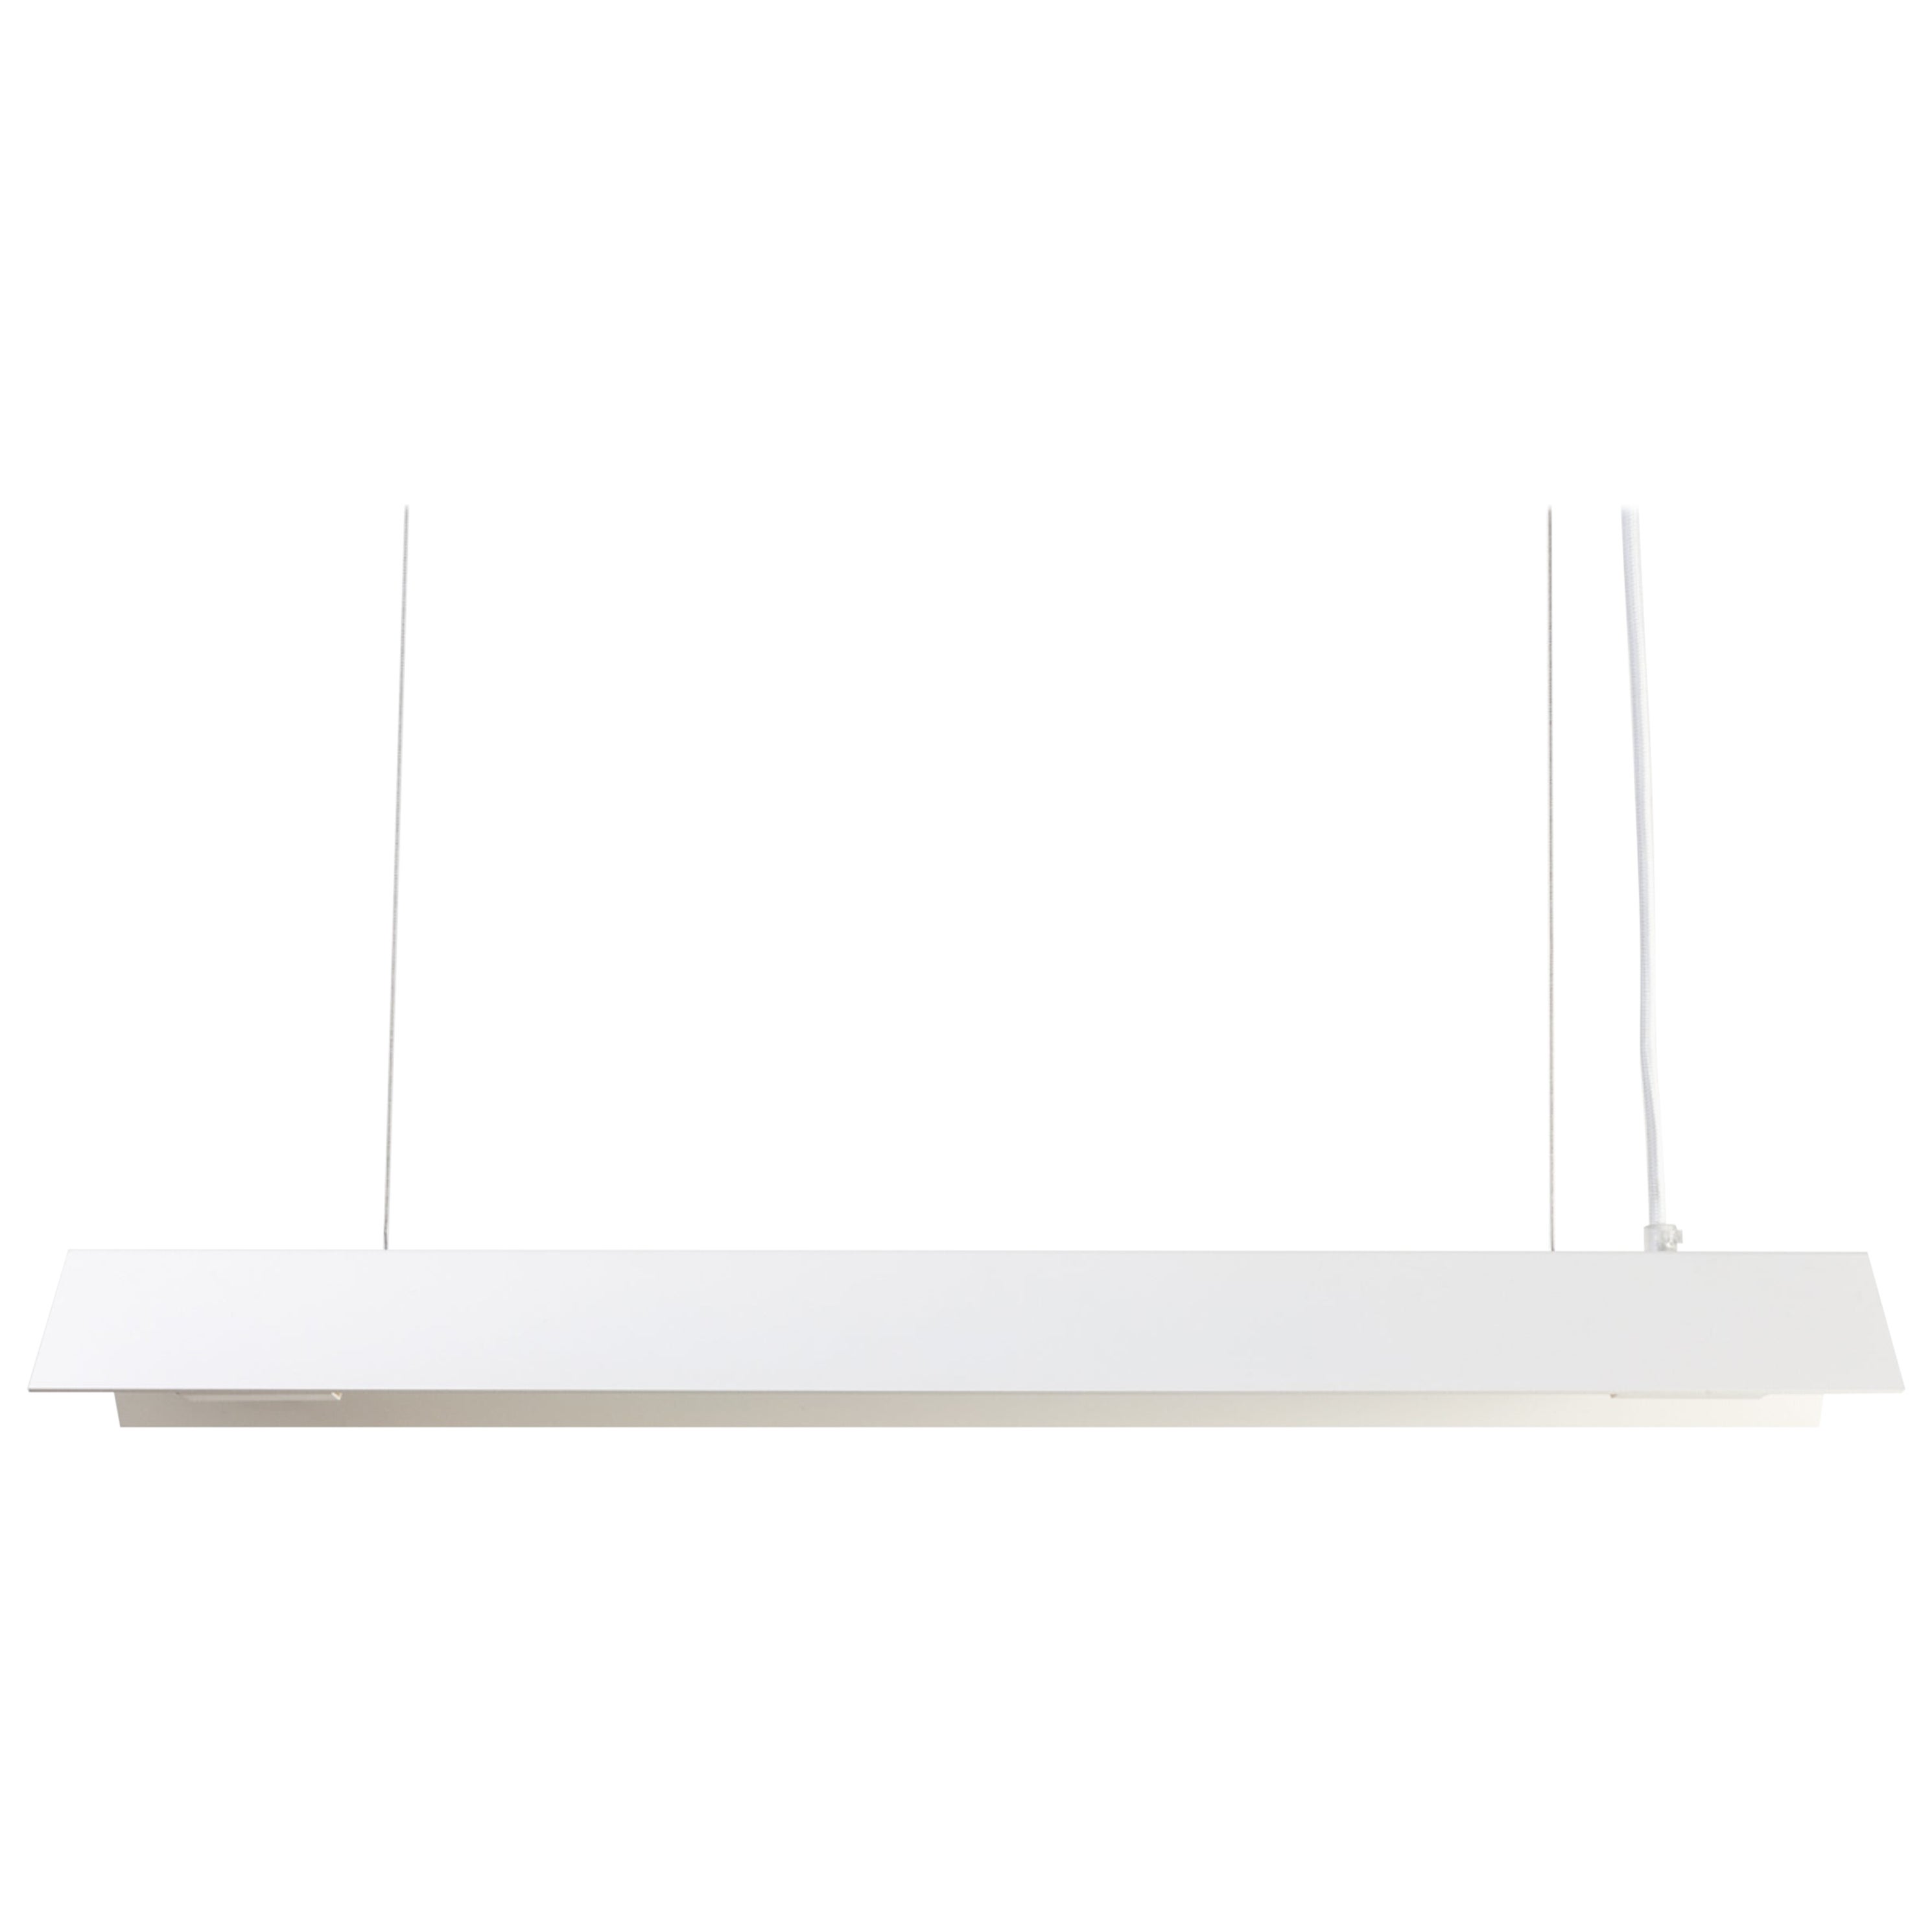 Large Misalliance Ral Pure White Suspended Light by Lexavala